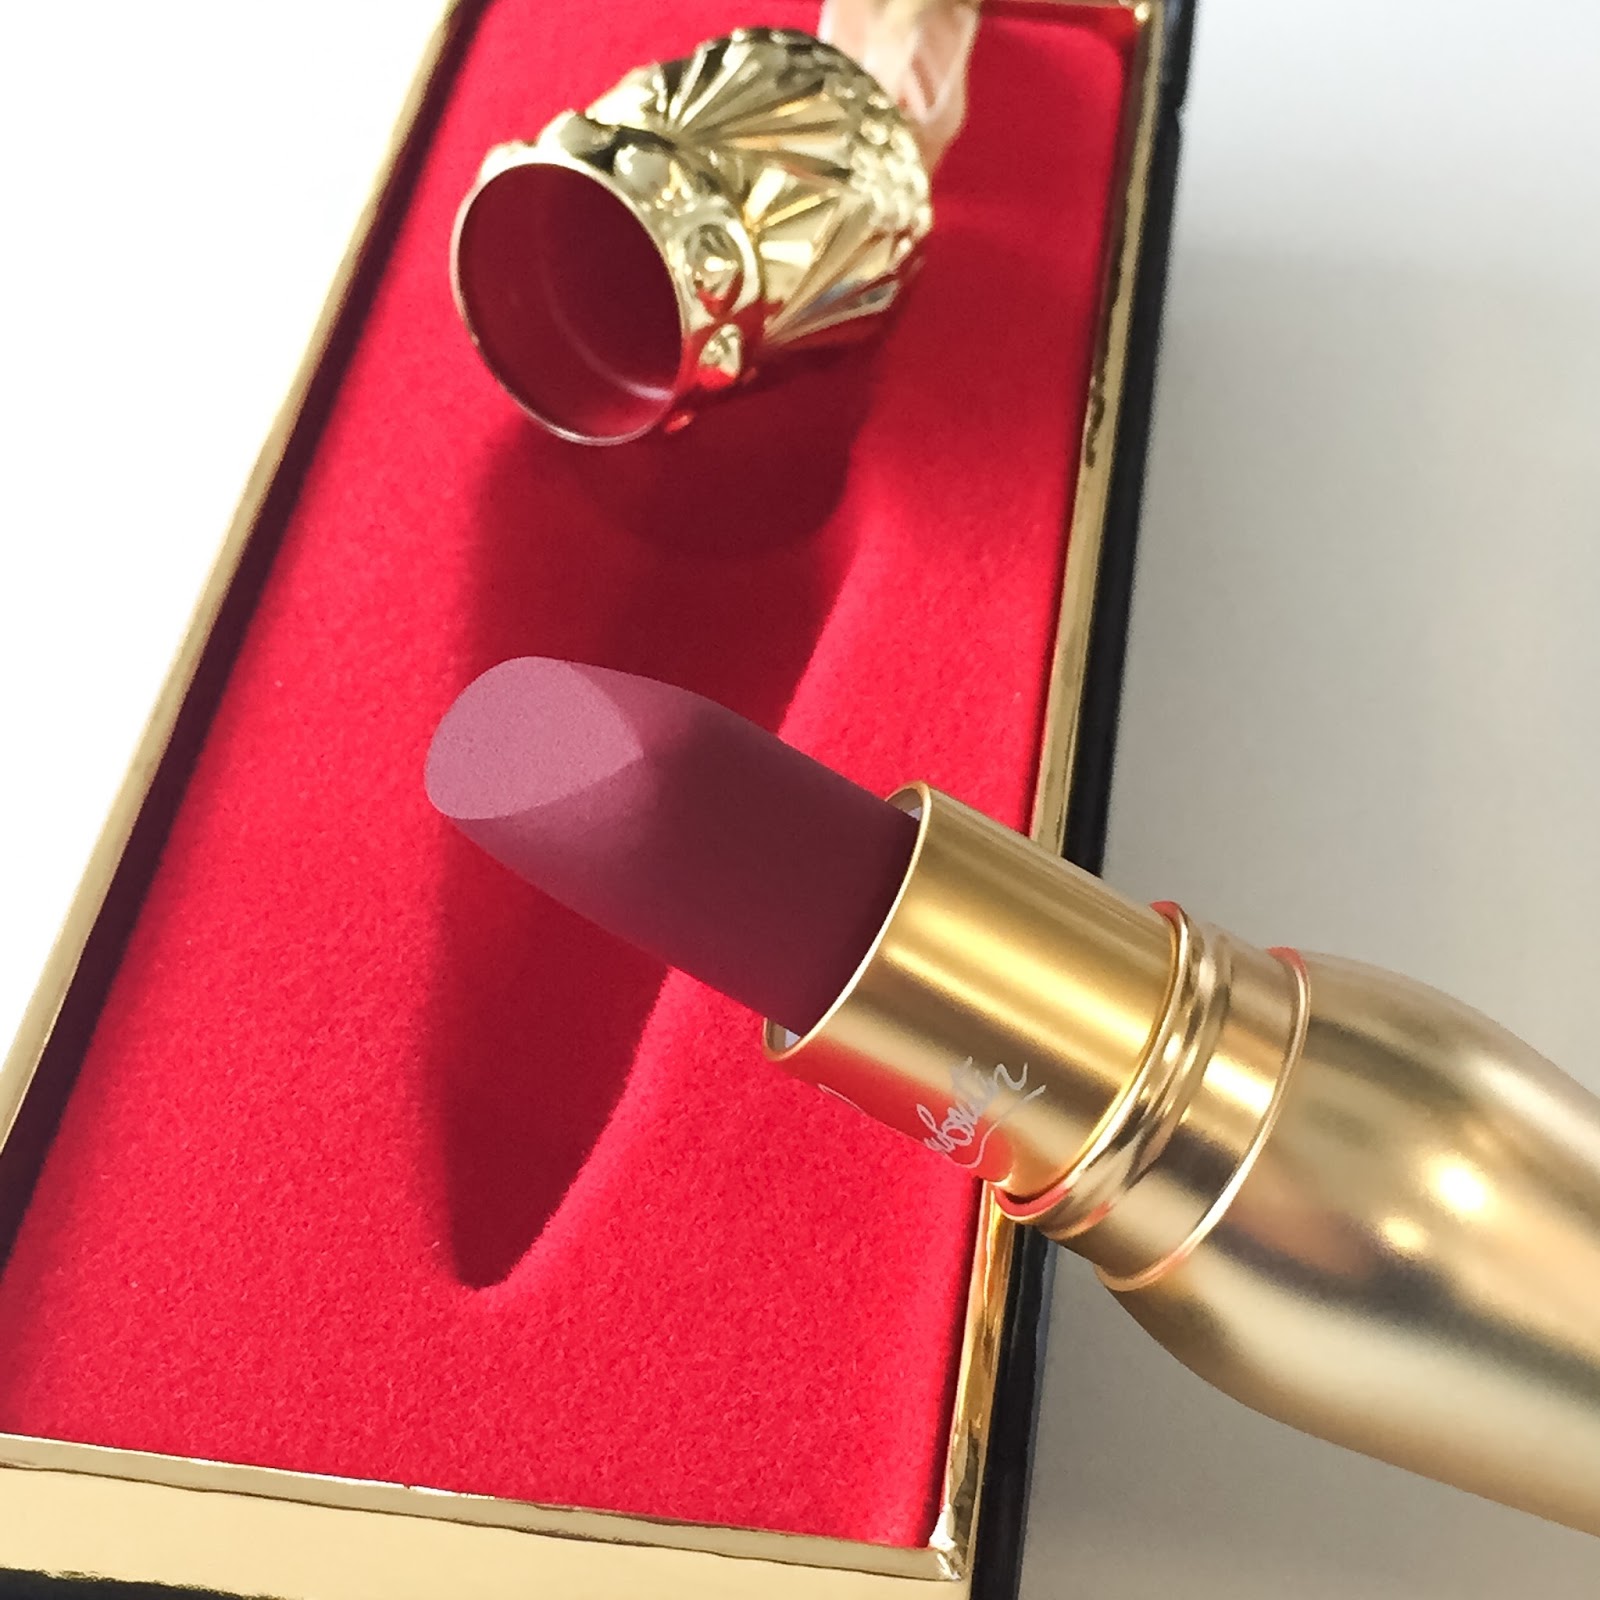 Christian Louboutin Lip Color Review & Swatches